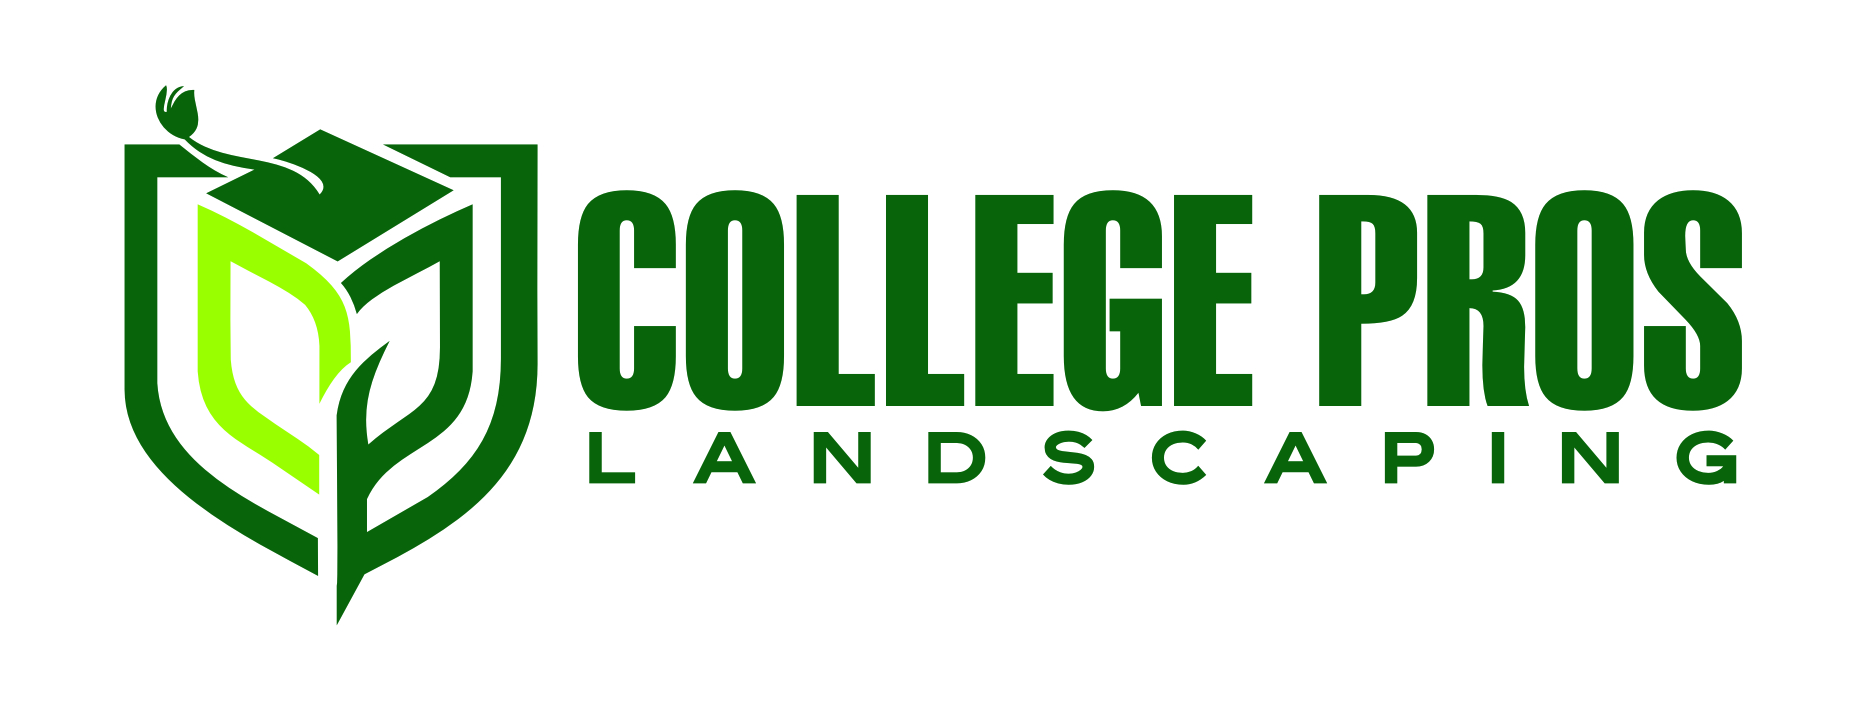 College Pros Landscaping Logo